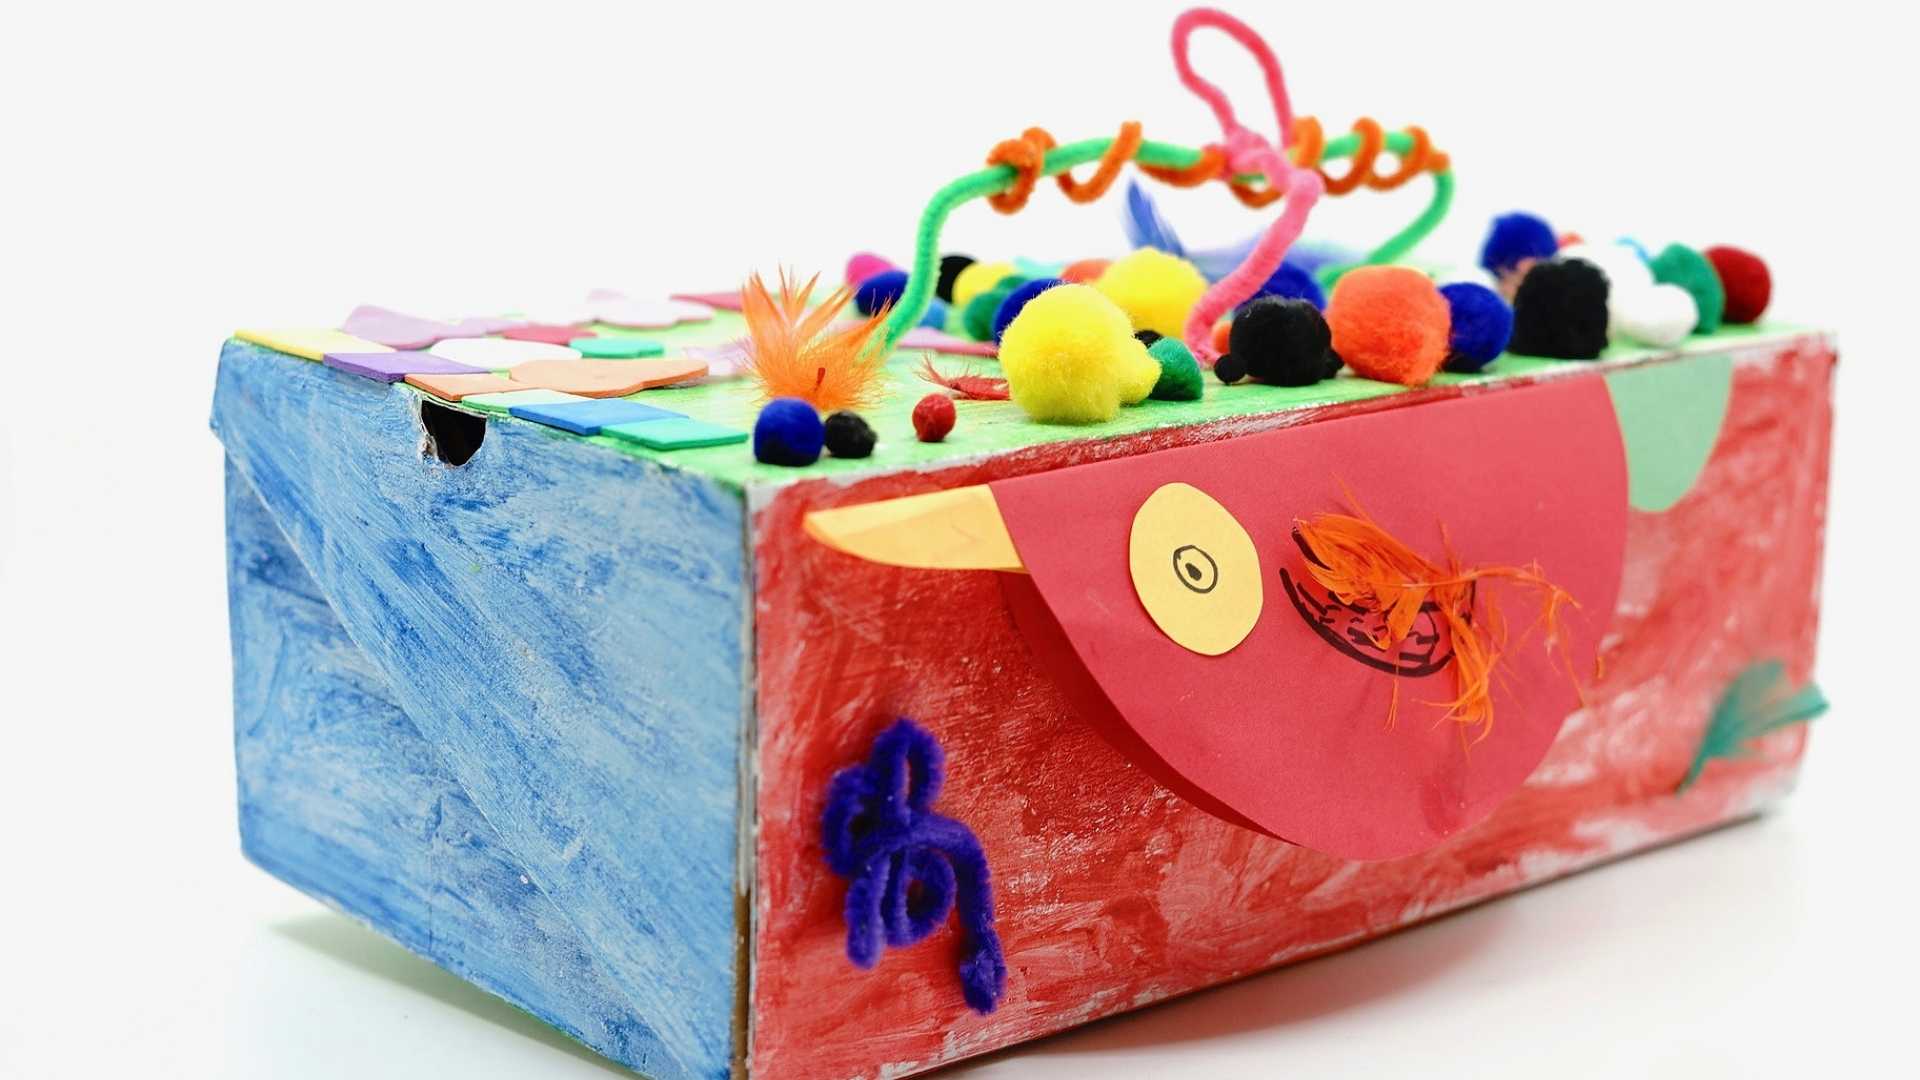 A decorated box with colorful pipe cleaners, feather, foams and pompom cotton balls